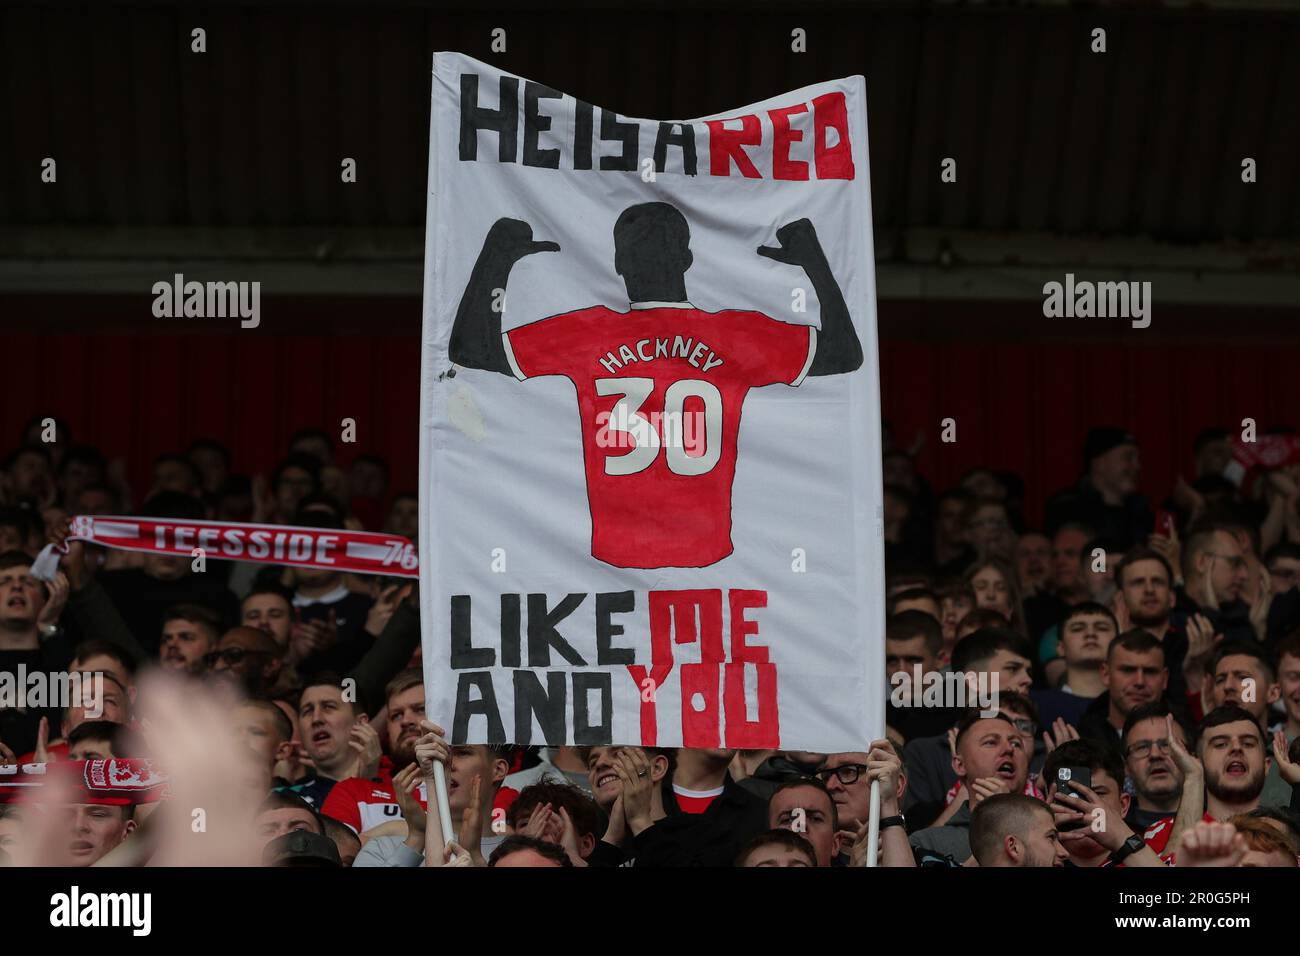 middlesbrough-uk-08th-may-2023-middlesbrough-supporters-wave-a-flag-for-hayden-hackney-during-the-sky-bet-championship-match-middlesbrough-vs-coventry-city-at-riverside-stadium-middlesbrough-united-kingdom-8th-may-2023-photo-by-james-heatonnews-images-in-middlesbrough-united-kingdom-on-582023-photo-by-james-heatonnews-imagessipa-usa-credit-sipa-usaalamy-live-news-2R0G5PH.jpg